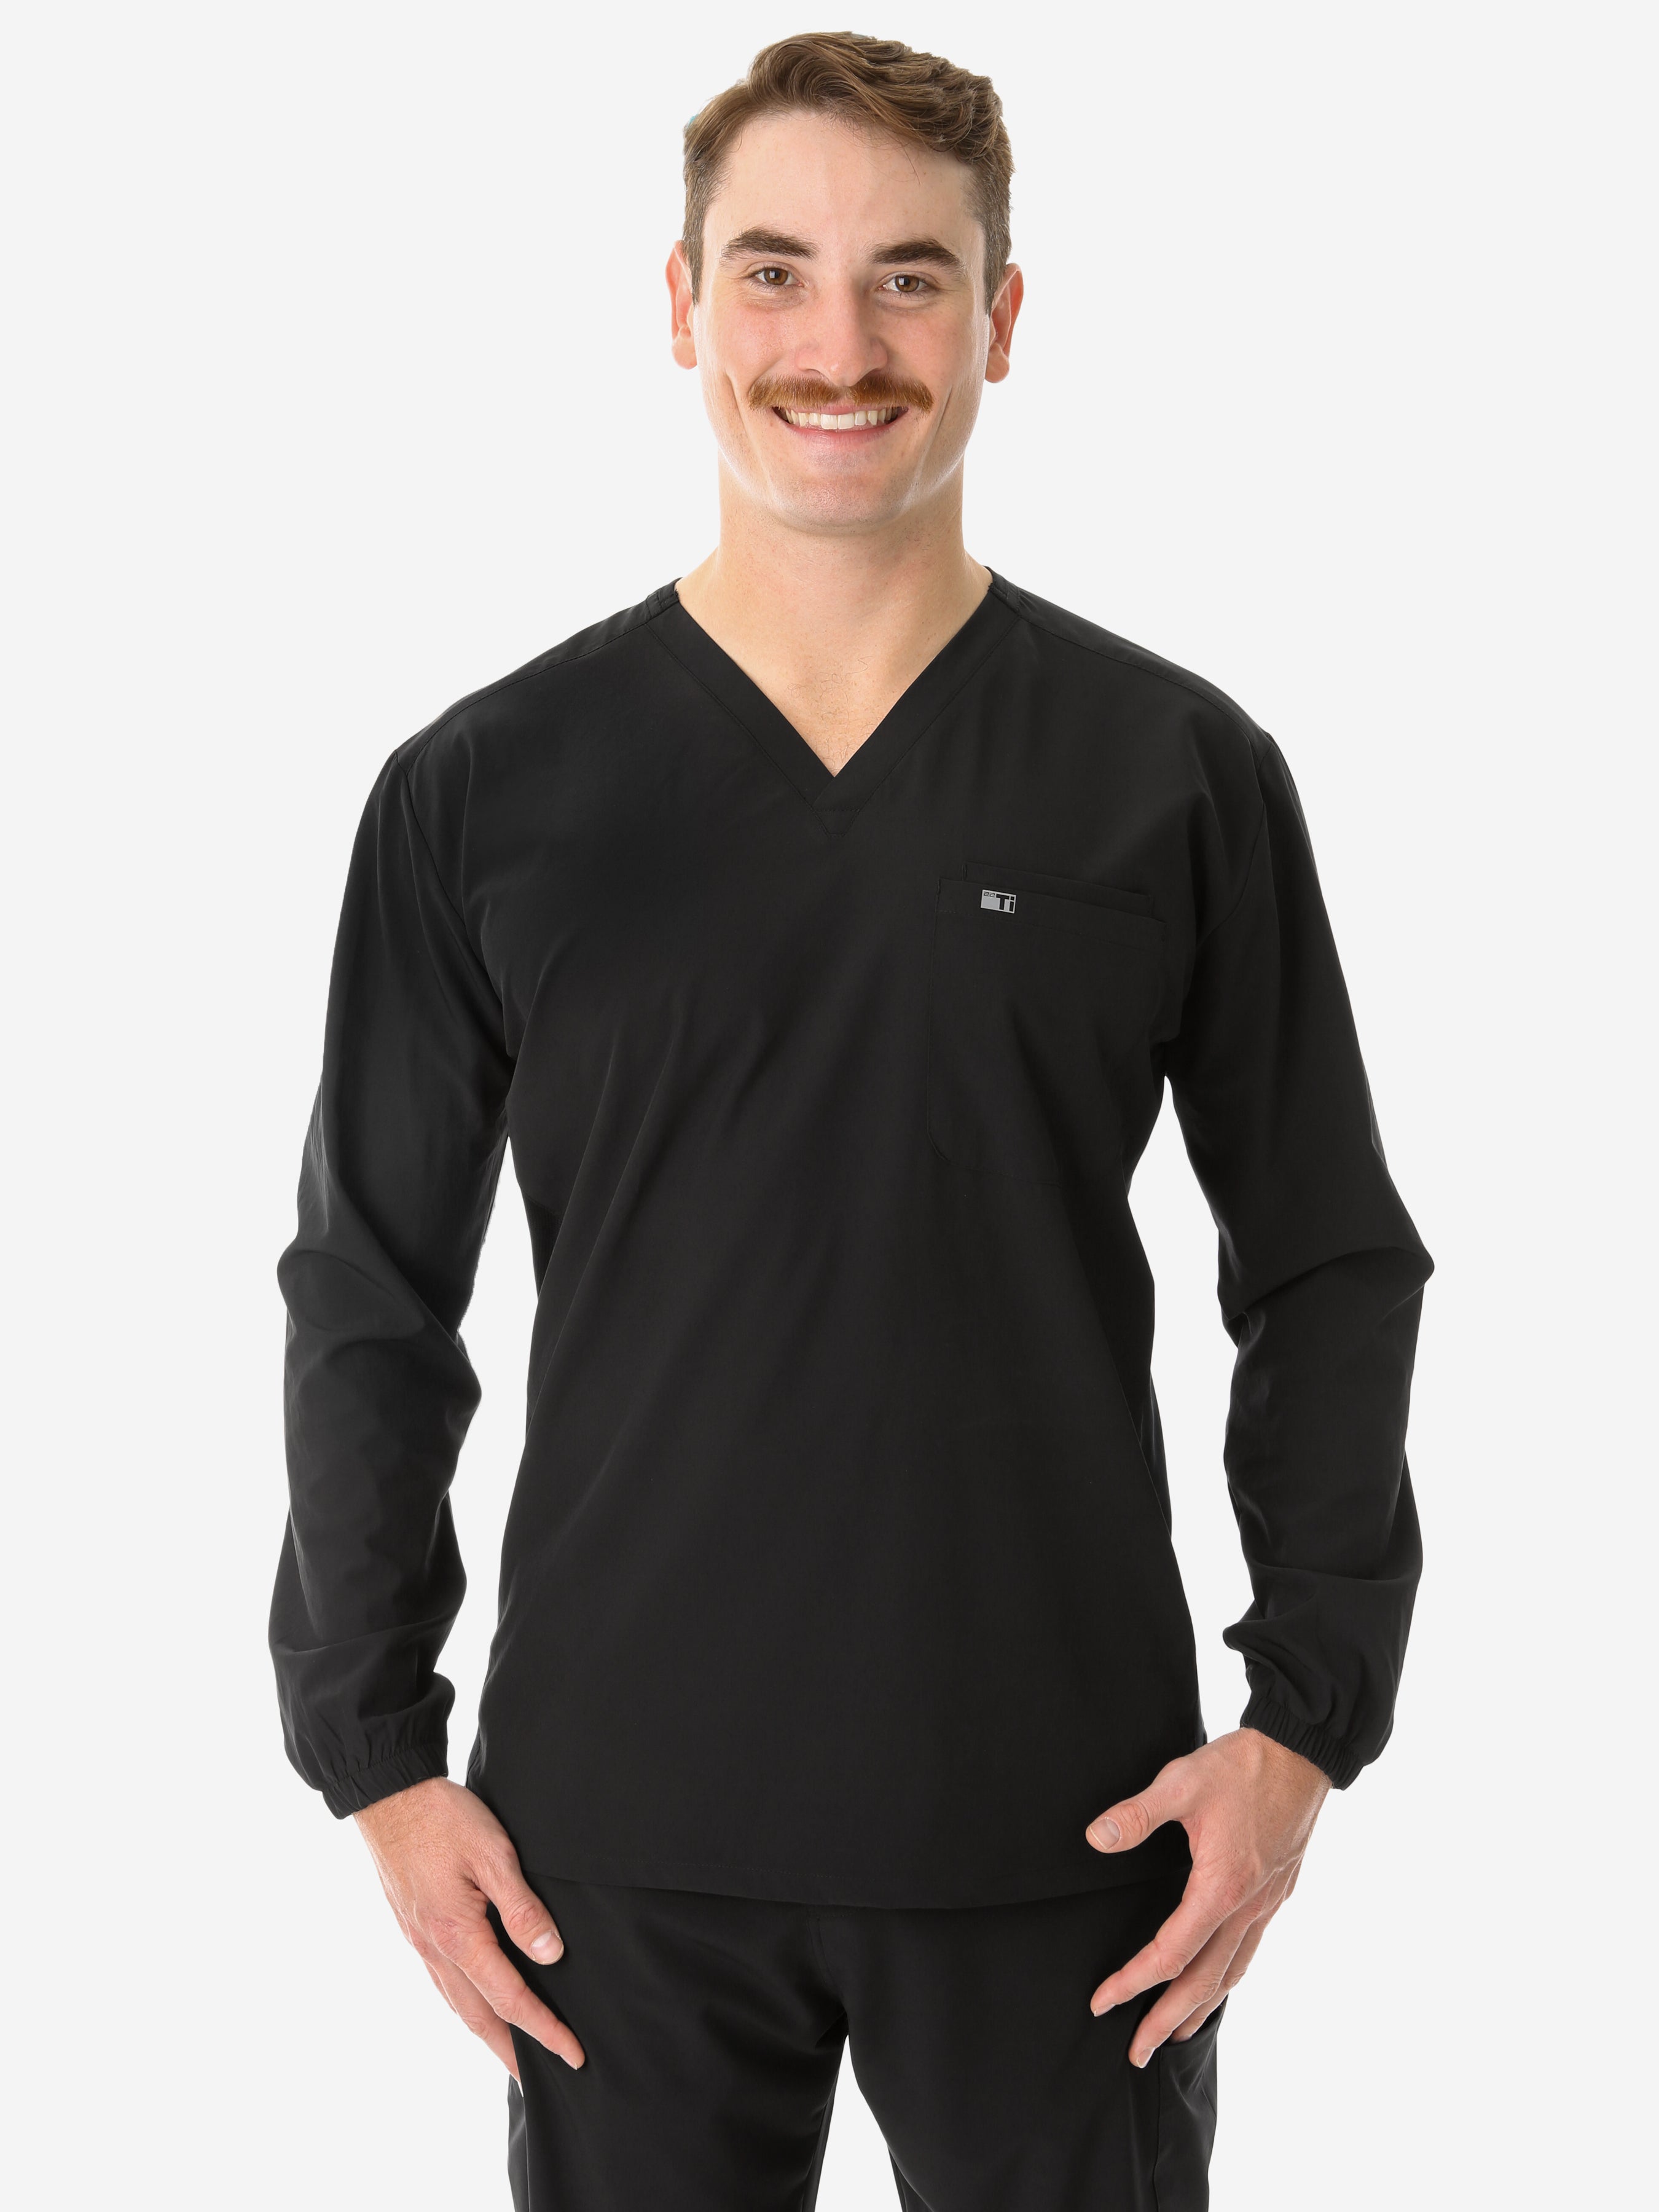 Men's Long-Sleeve Scrub Top Only Untucked Front View Real Black